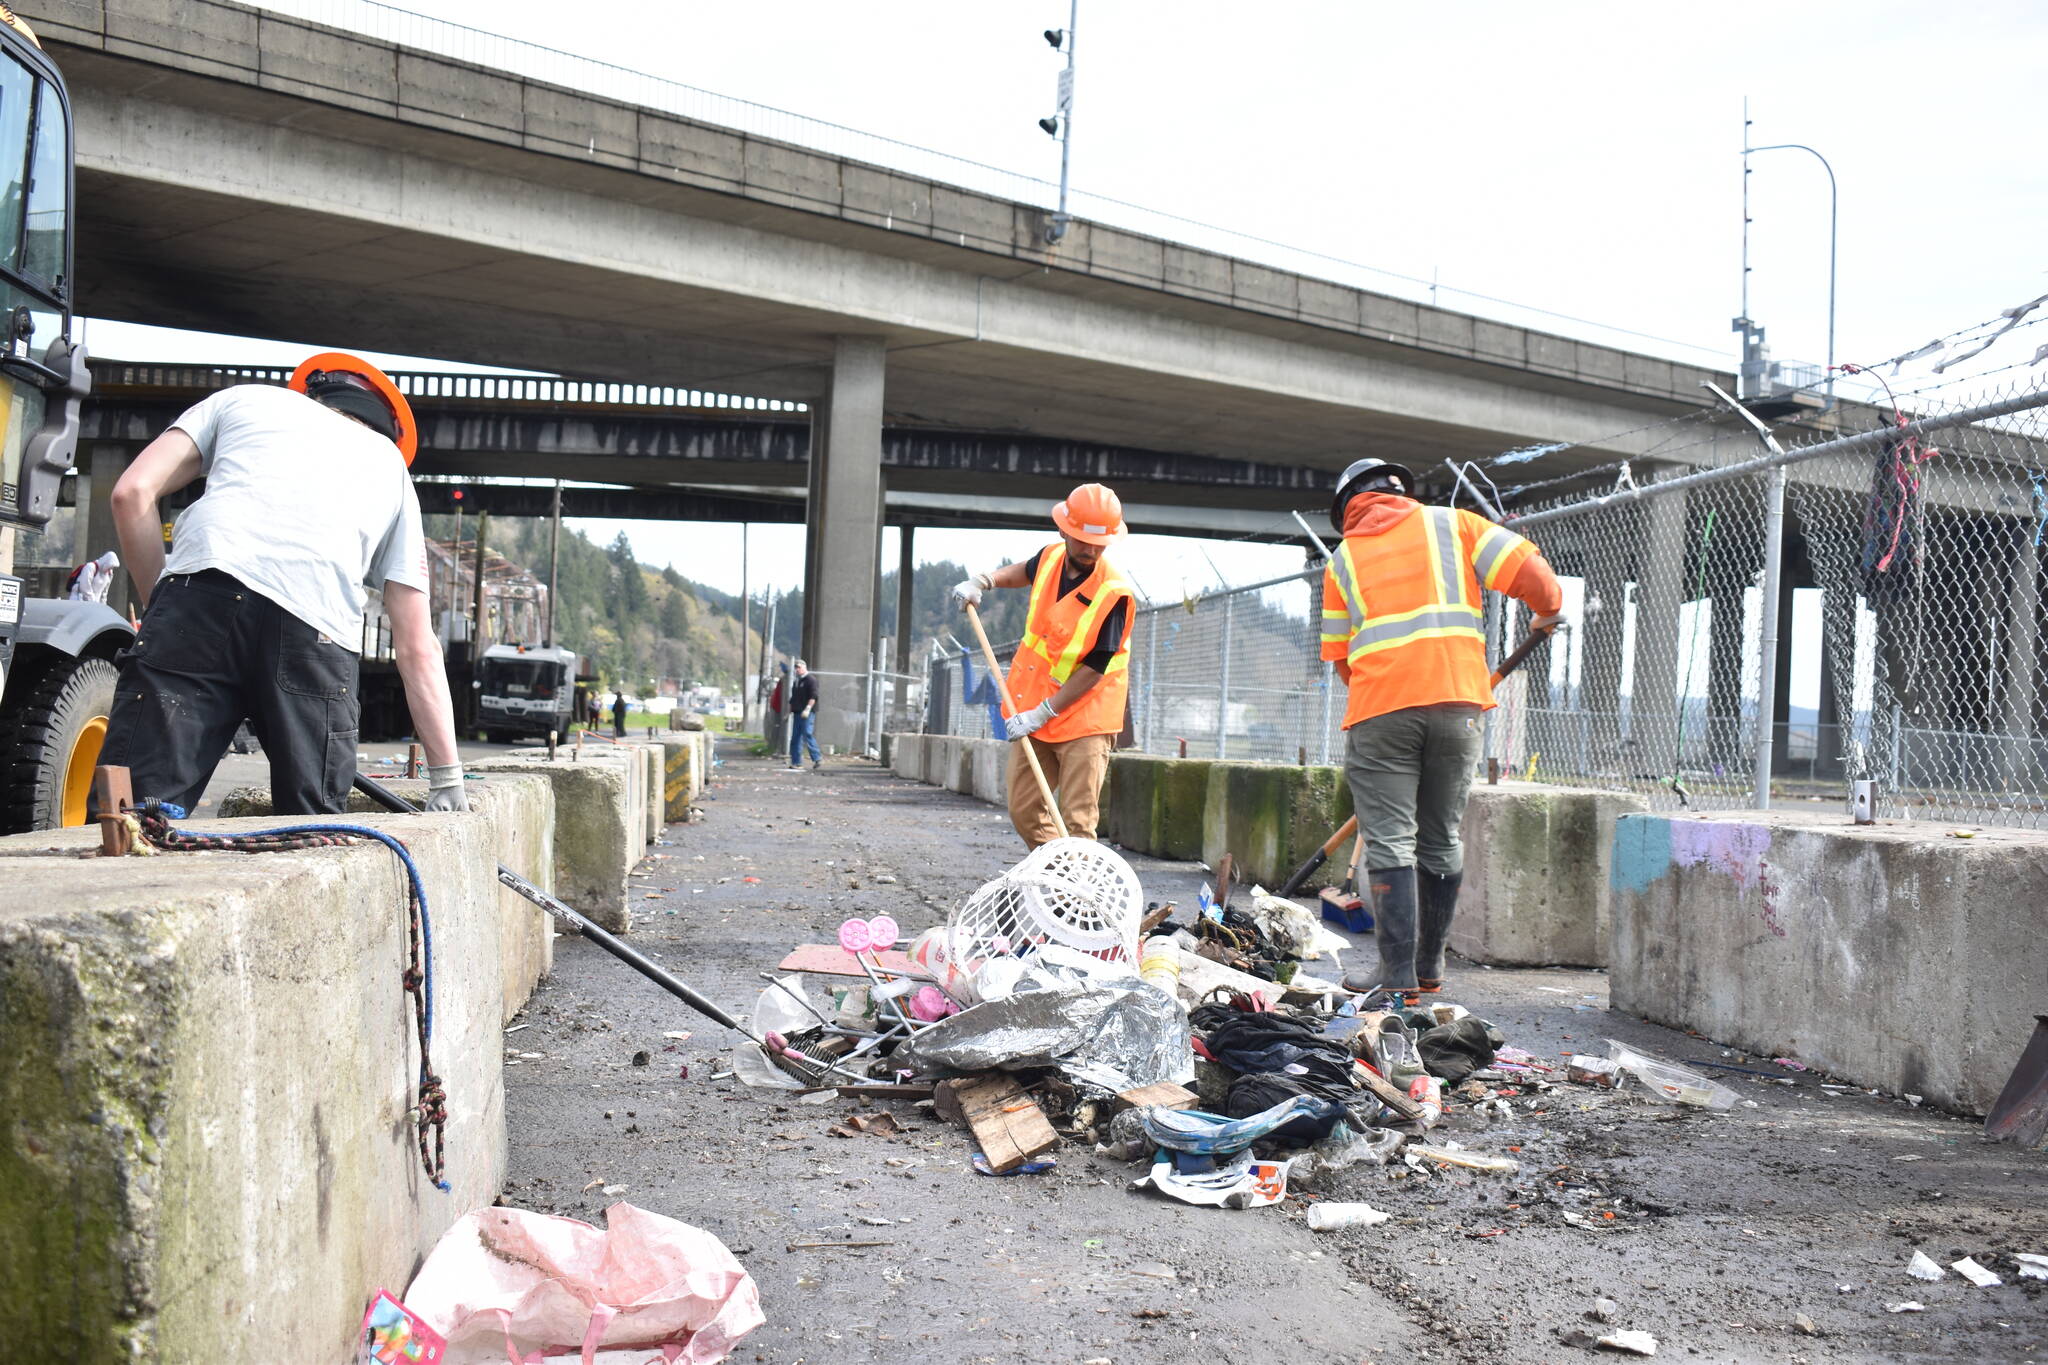 Clayton Franke / The Daily World
City of Aberdeen workers sweep the last of the debris from a River Street homeless camp cleanup April 3. The city will perform intensive cleanups there once per month moving forward.